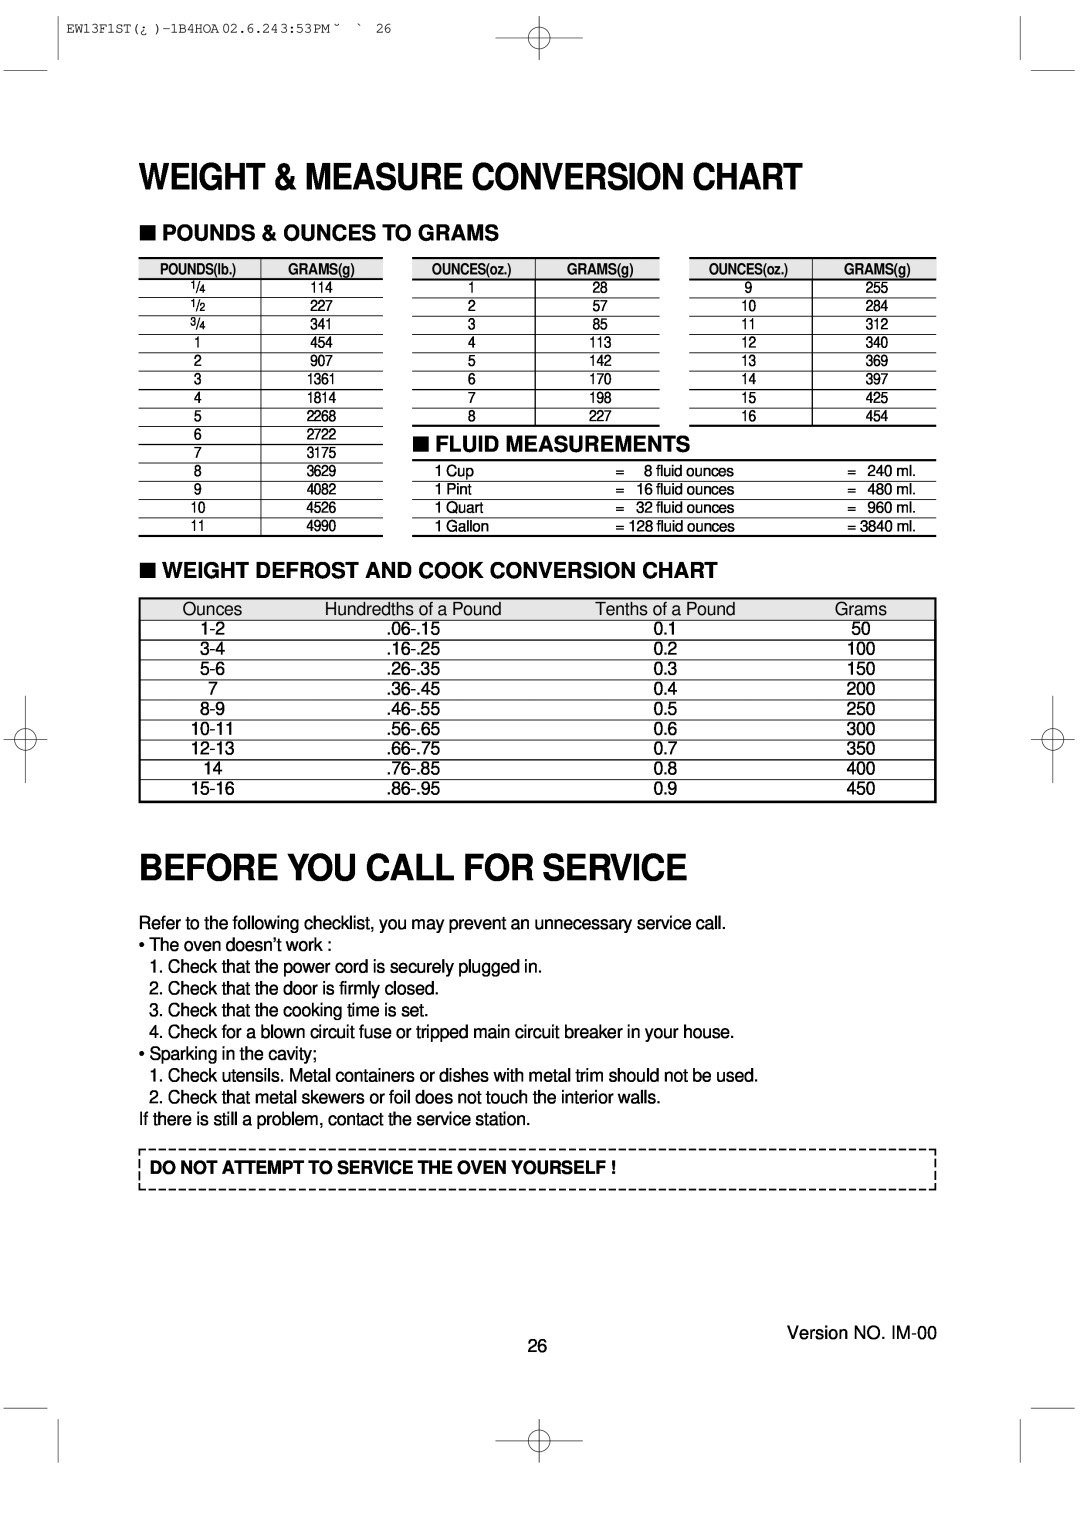 Daewoo EW13F1ST manual Weight & Measure Conversion Chart, Before You Call For Service, Pounds & Ounces To Grams 